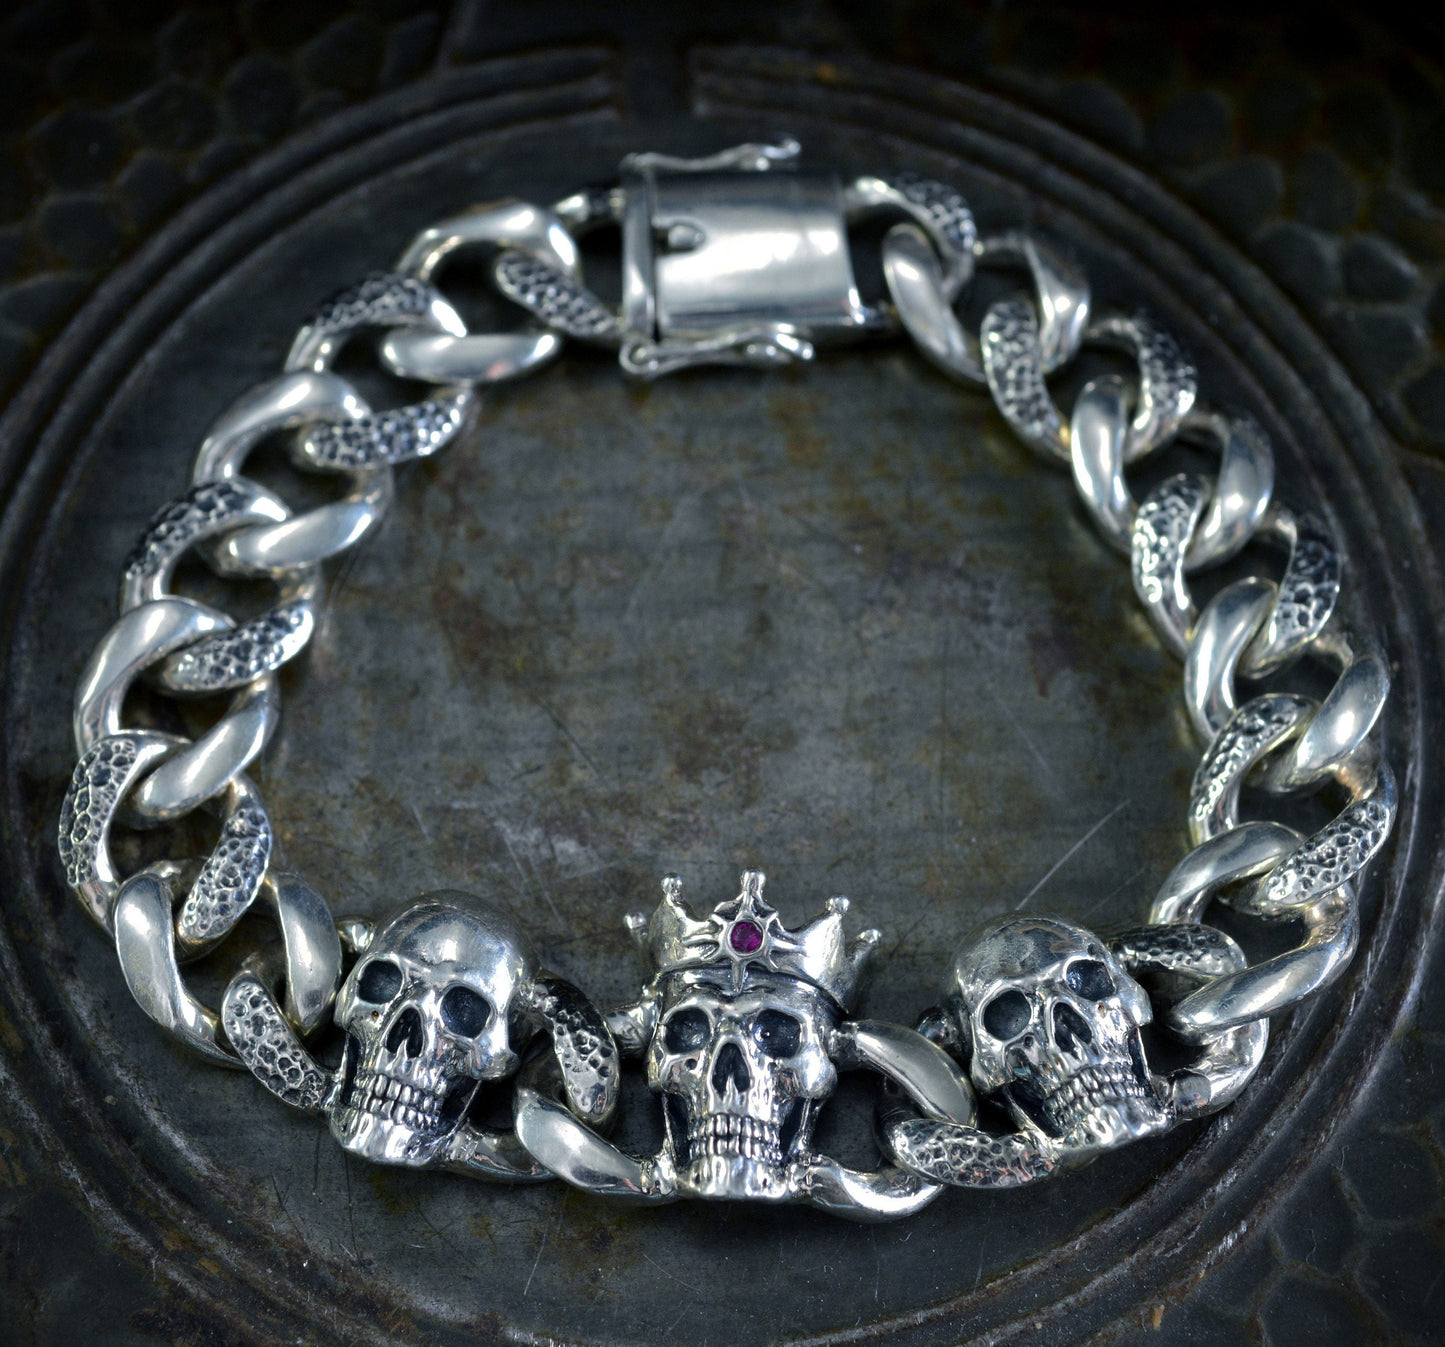 Solid silver bracelet with three skulls, Cuban chain links and locking box clasp, Memento mori